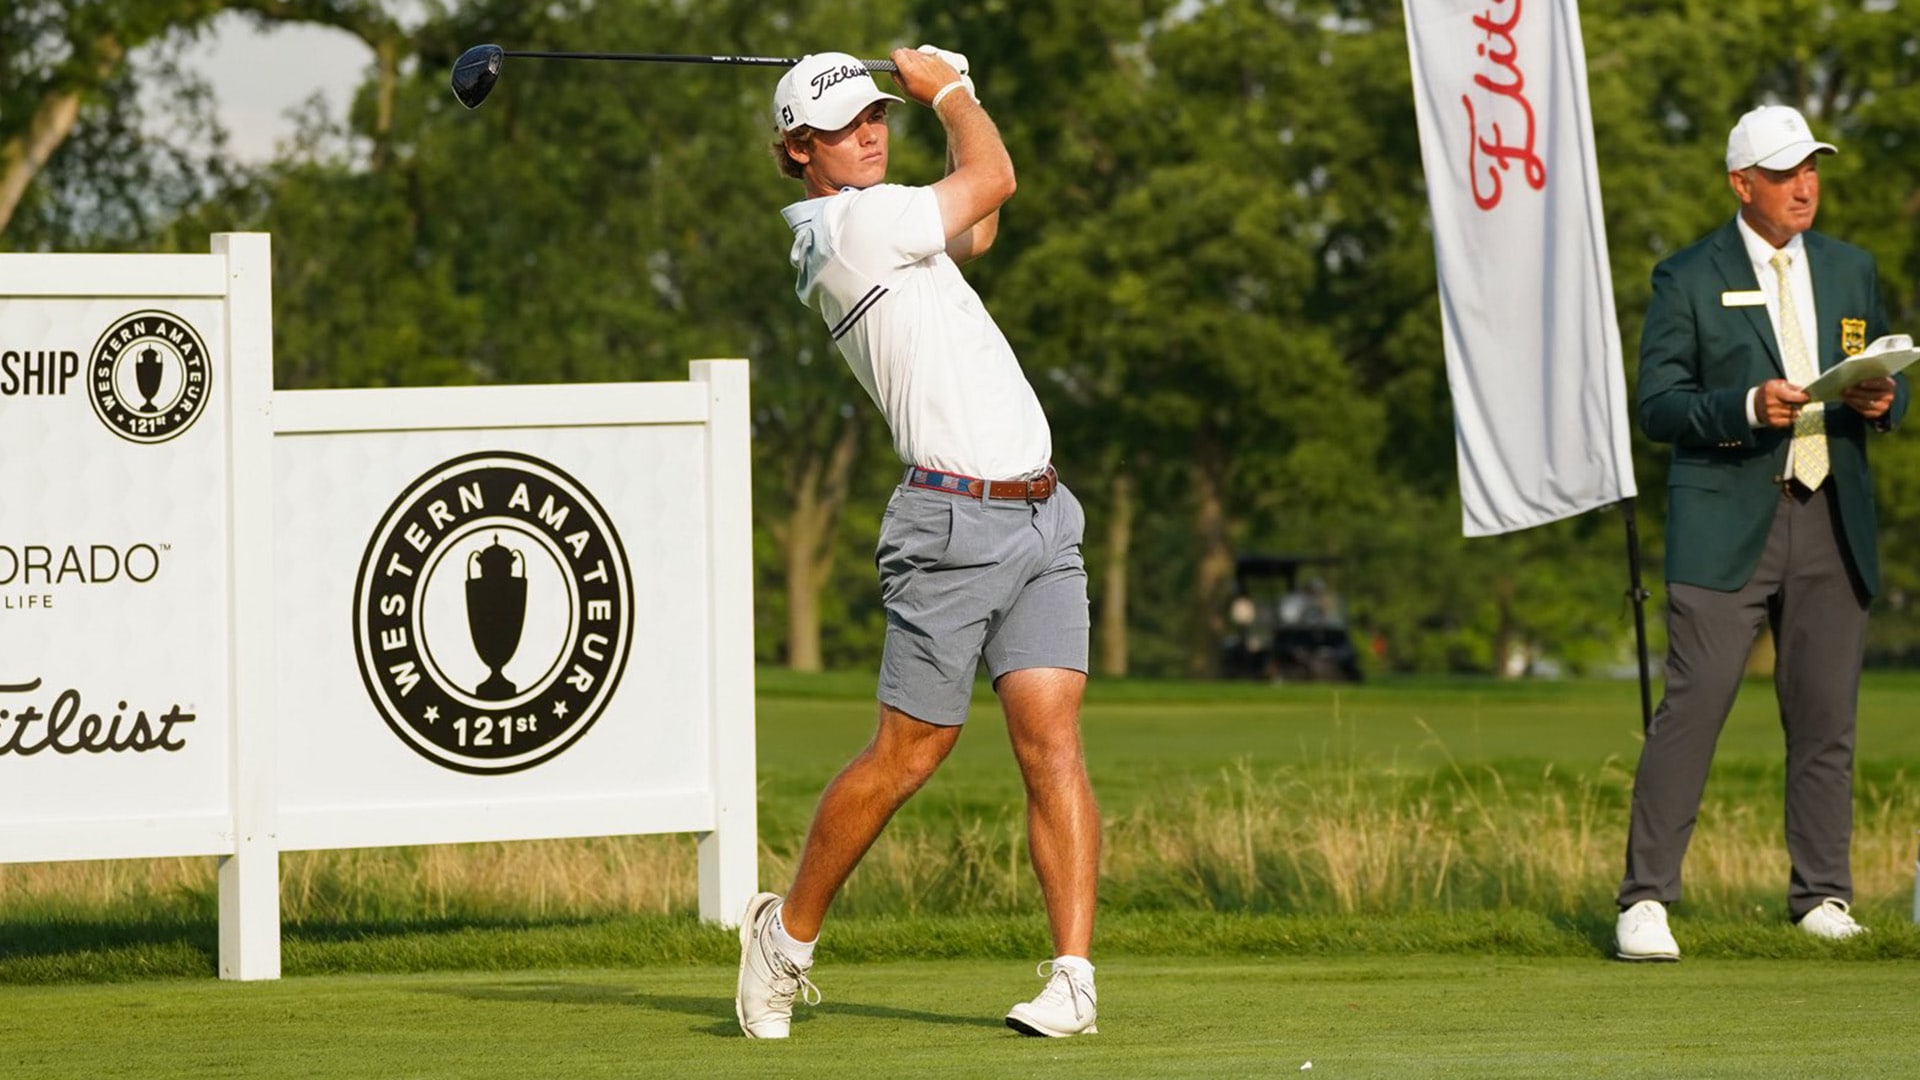 Western Amateur semifinals set after grueling day at North Shore Country Club